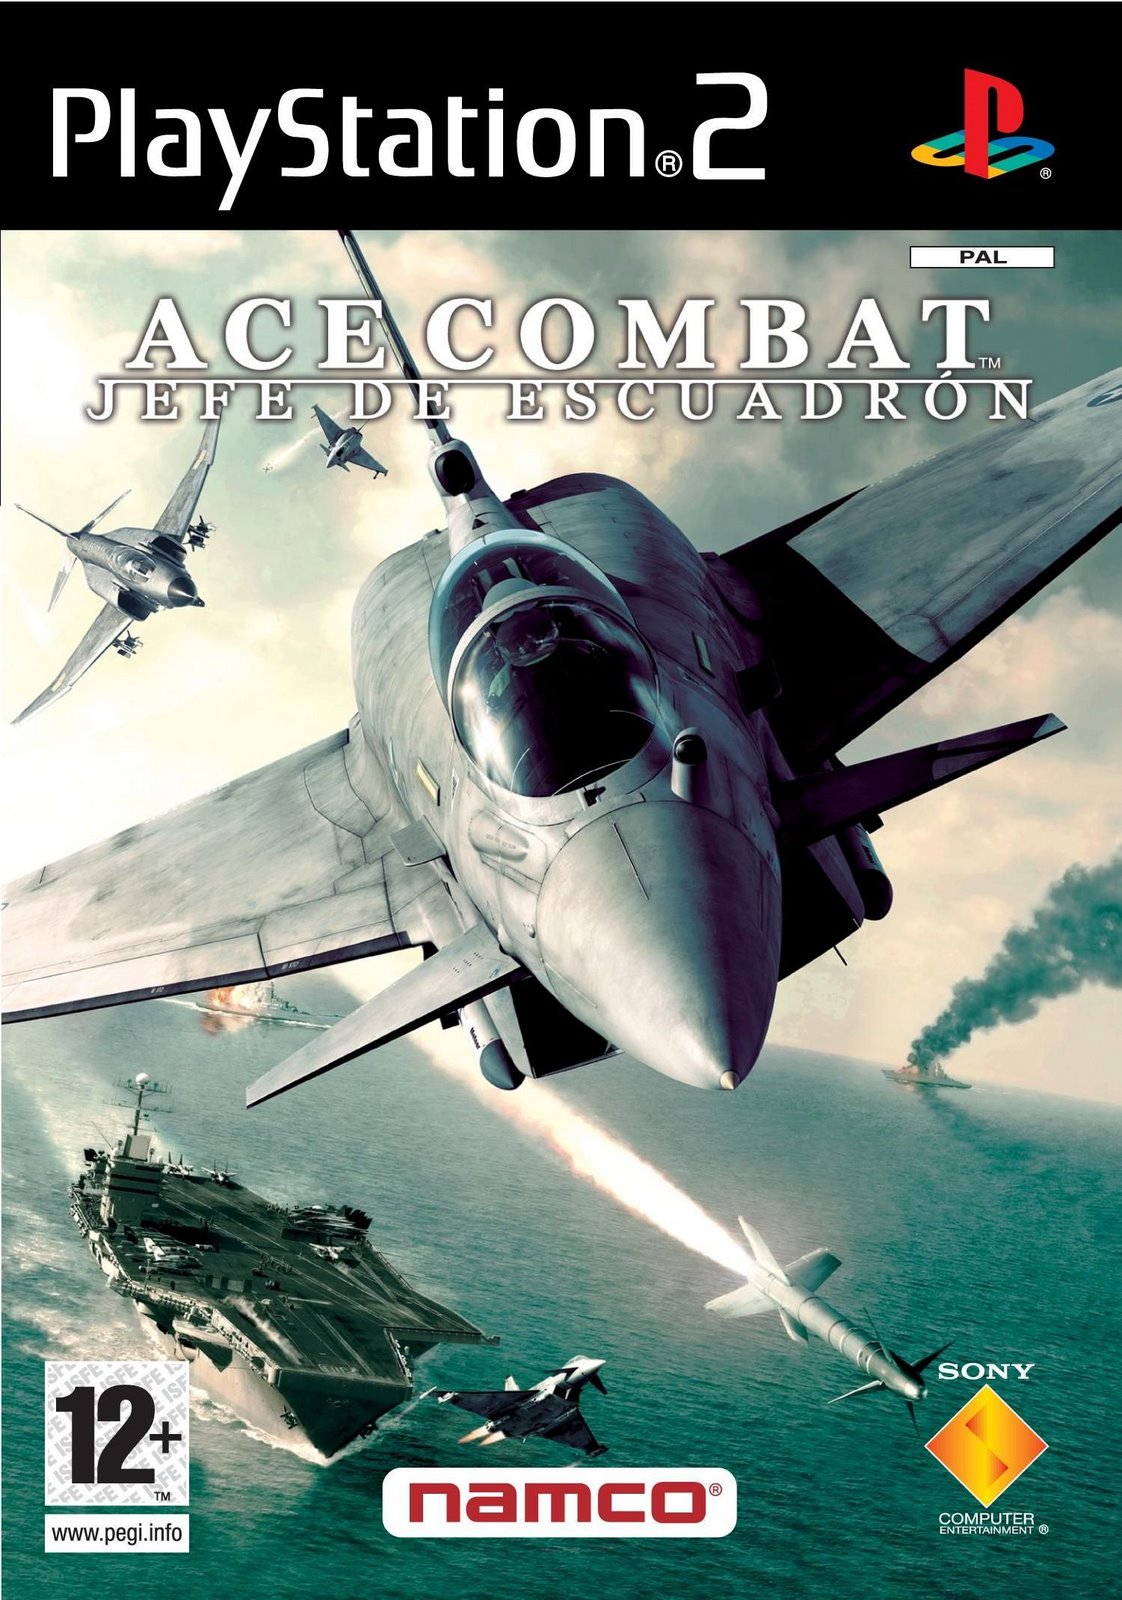 Ace Combat 5: The Unsung War Backgrounds on Wallpapers Vista